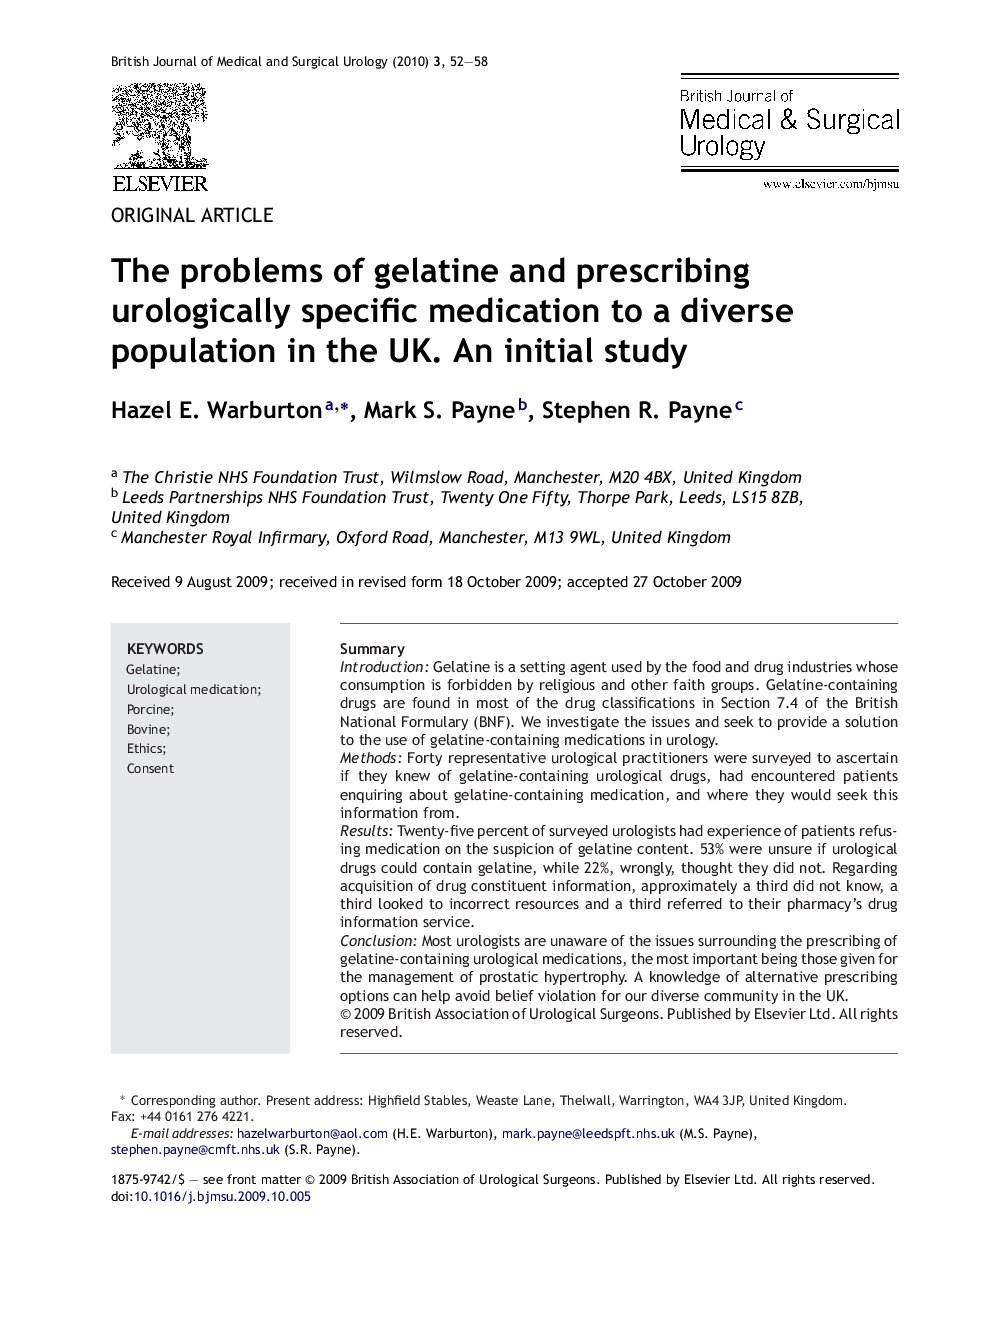 The problems of gelatine and prescribing urologically specific medication to a diverse population in the UK. An initial study